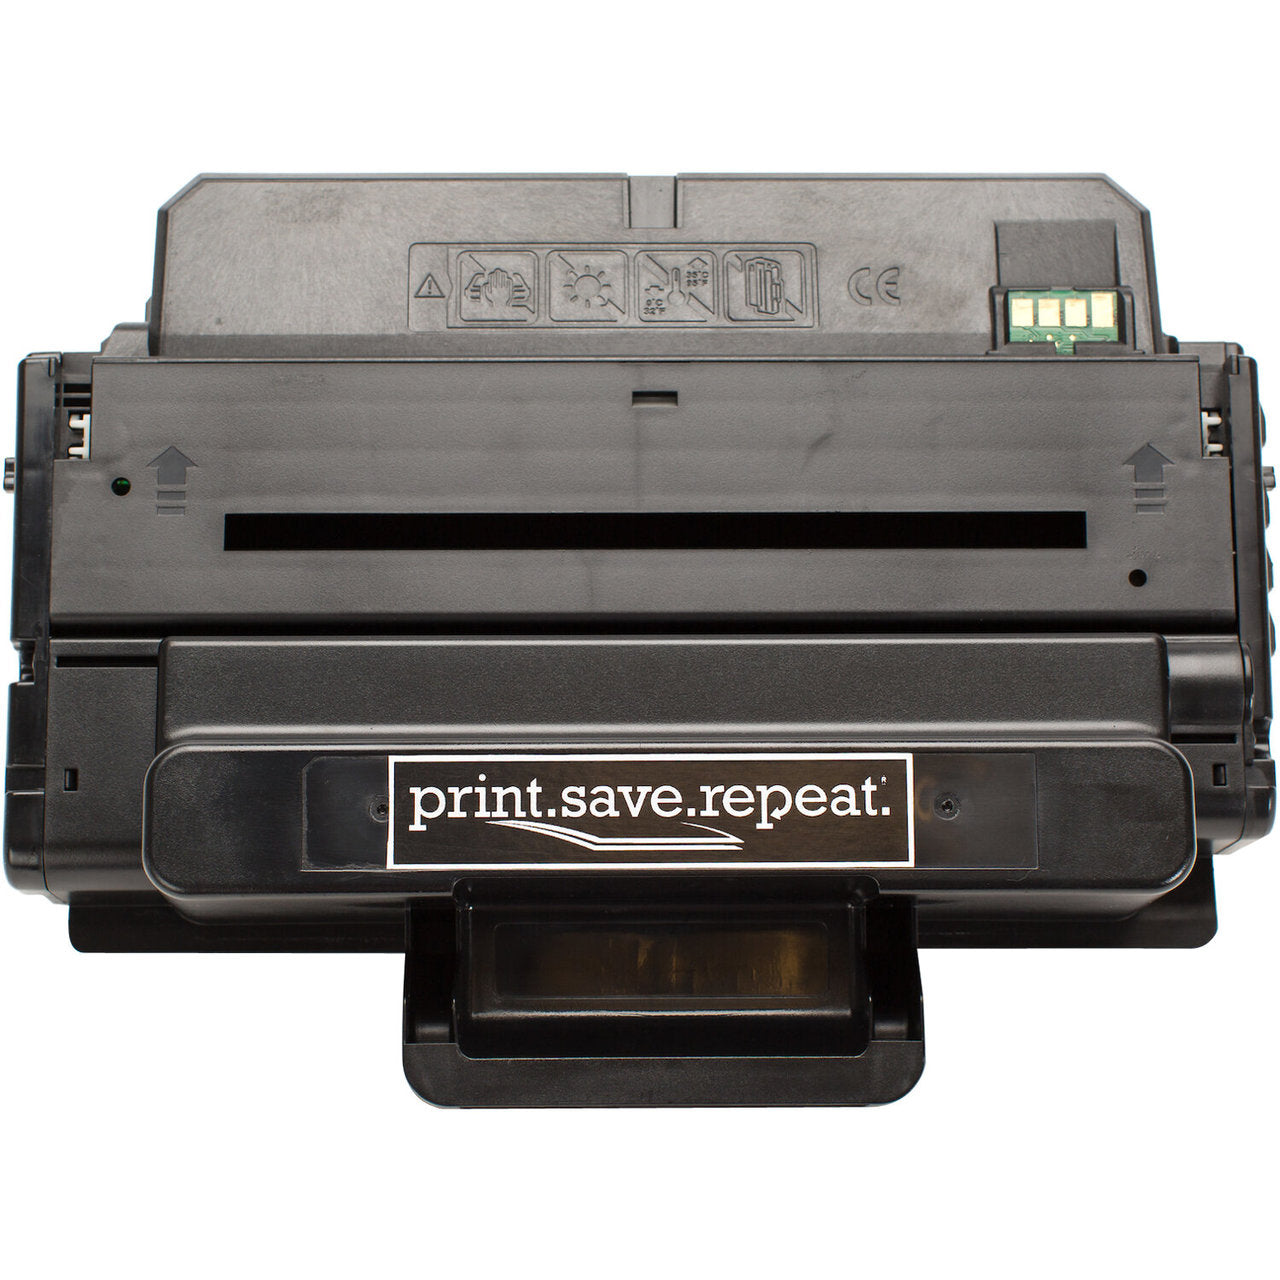 Print.Save.Repeat. Dell C7D6F High Yield Remanufactured Toner Cartridge for B2375 [10,000 Pages]